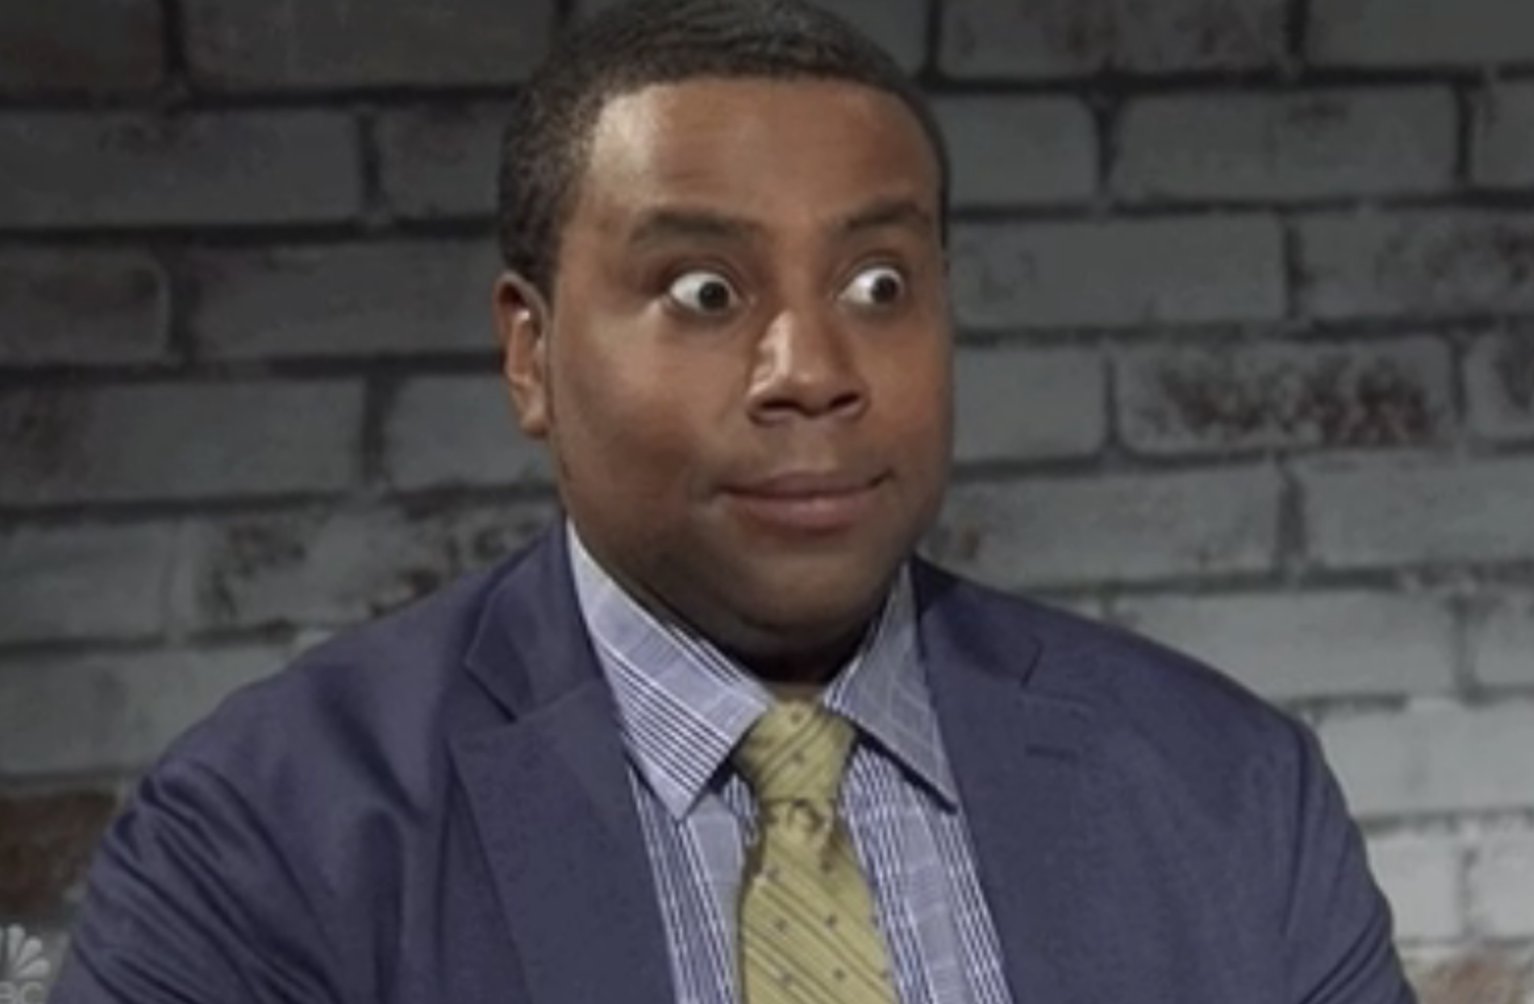 Kenan Thompson making a facial expression, wearing a suit and tie